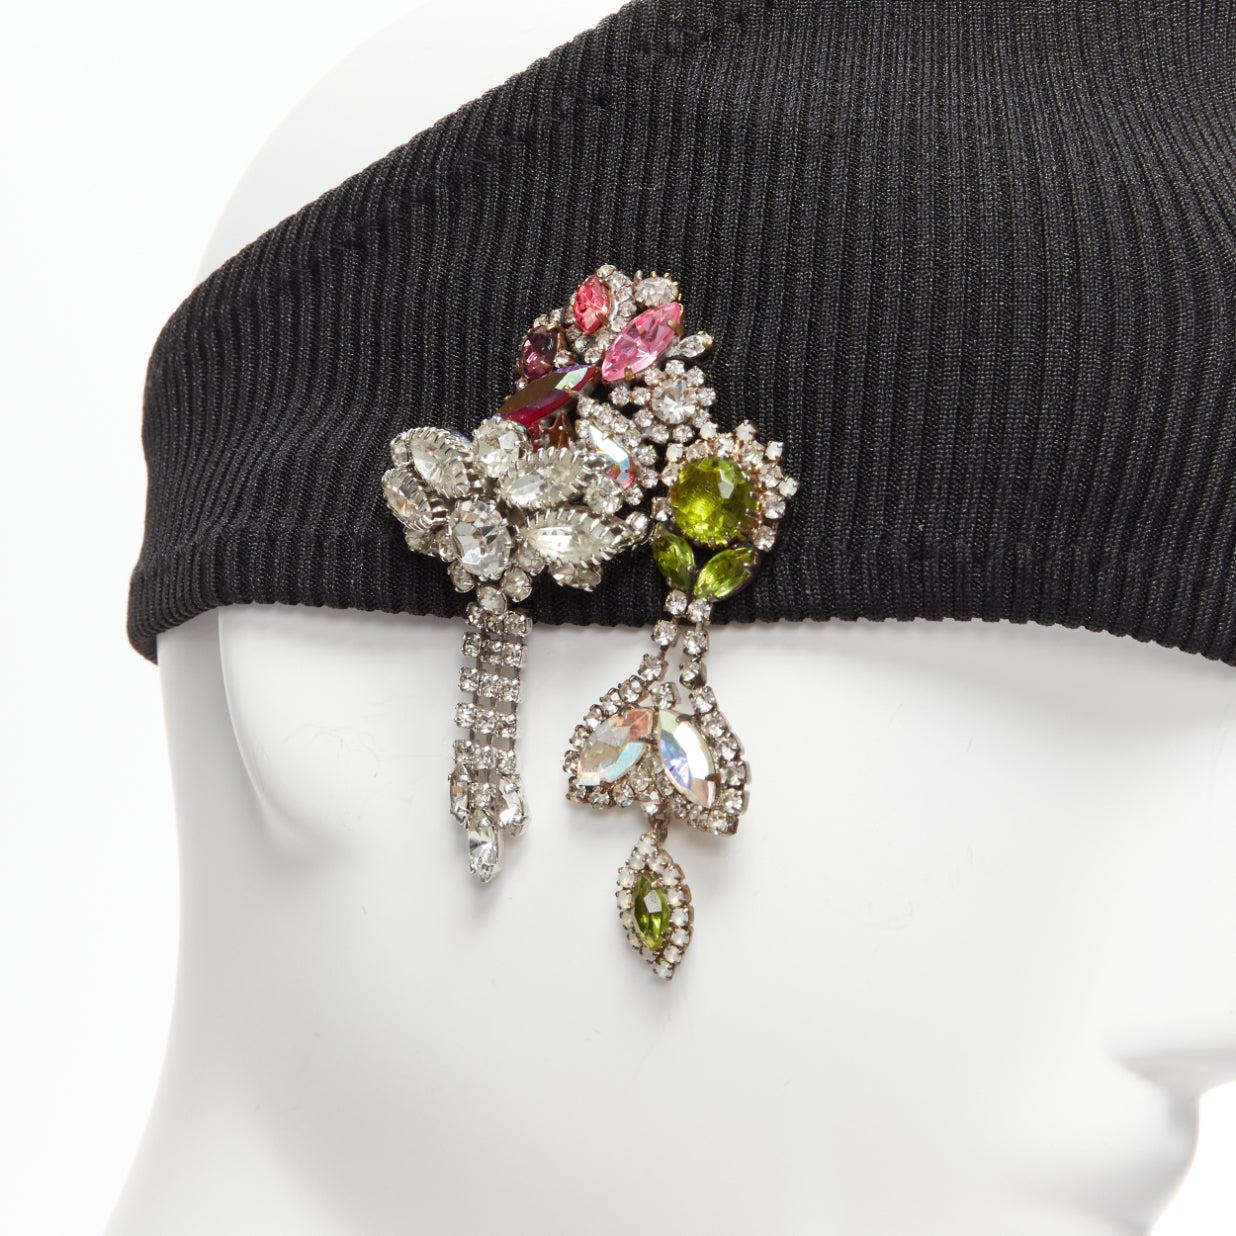 new MARINE SERRE Black Moon logo jewel brooch ribbed headband
Reference: BSHW/A00087
Brand: Marine Serre
Collection: Runway
Material: Fabric
Color: Black, Multicolour
Pattern: Solid
Closure: Elasticated
Lining: Black Fabric

CONDITION:
Condition: